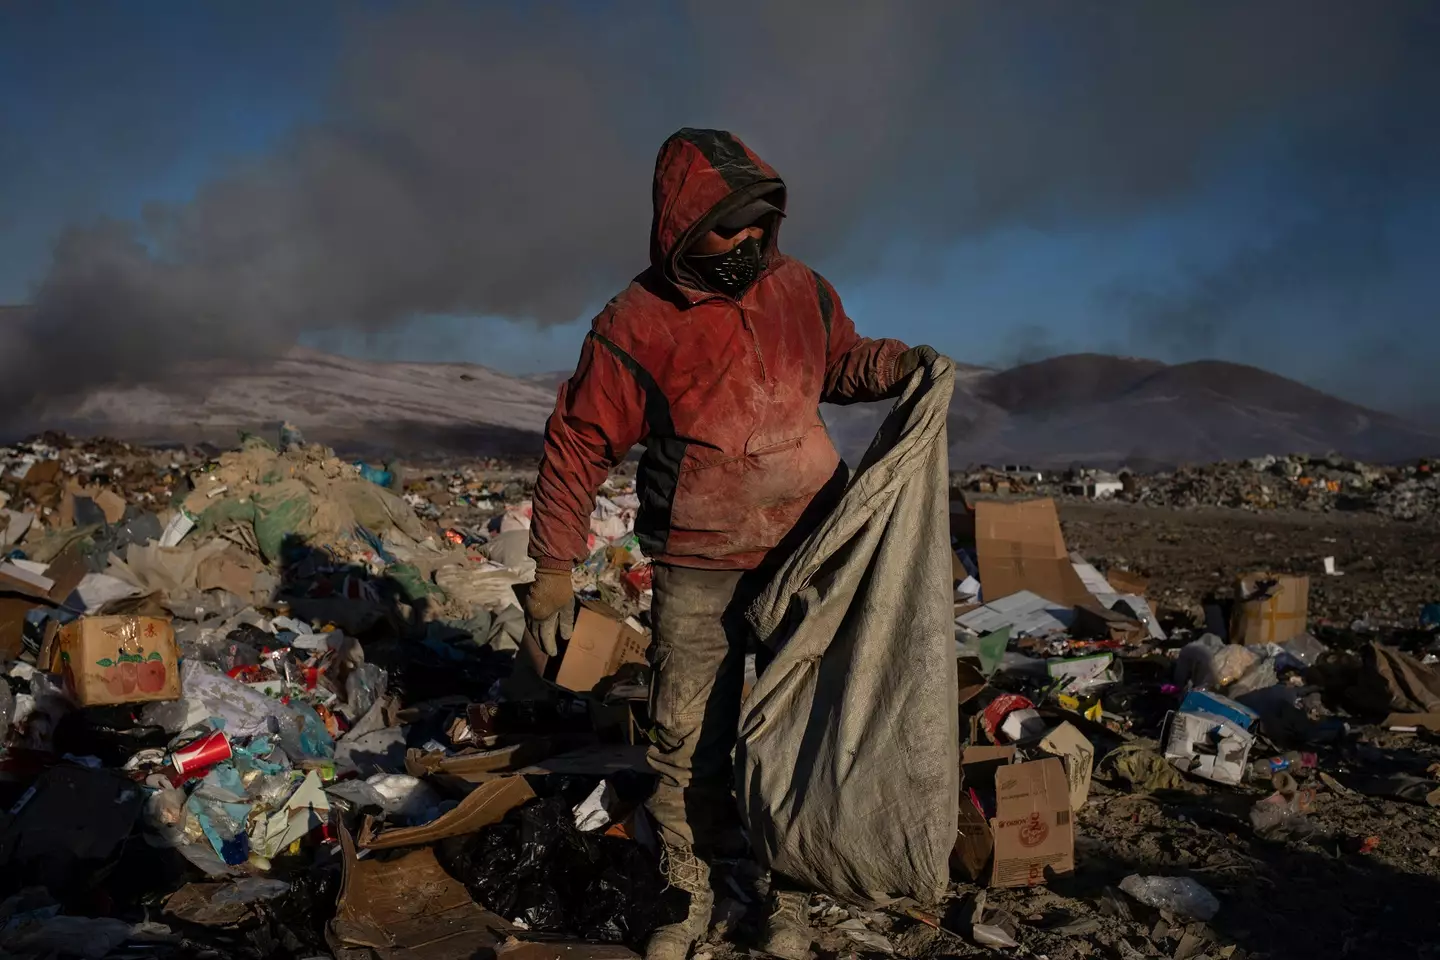 The Mongolian government introduced a ban on burning raw coal in 2019 in a bid to tackle the pollution crisis.